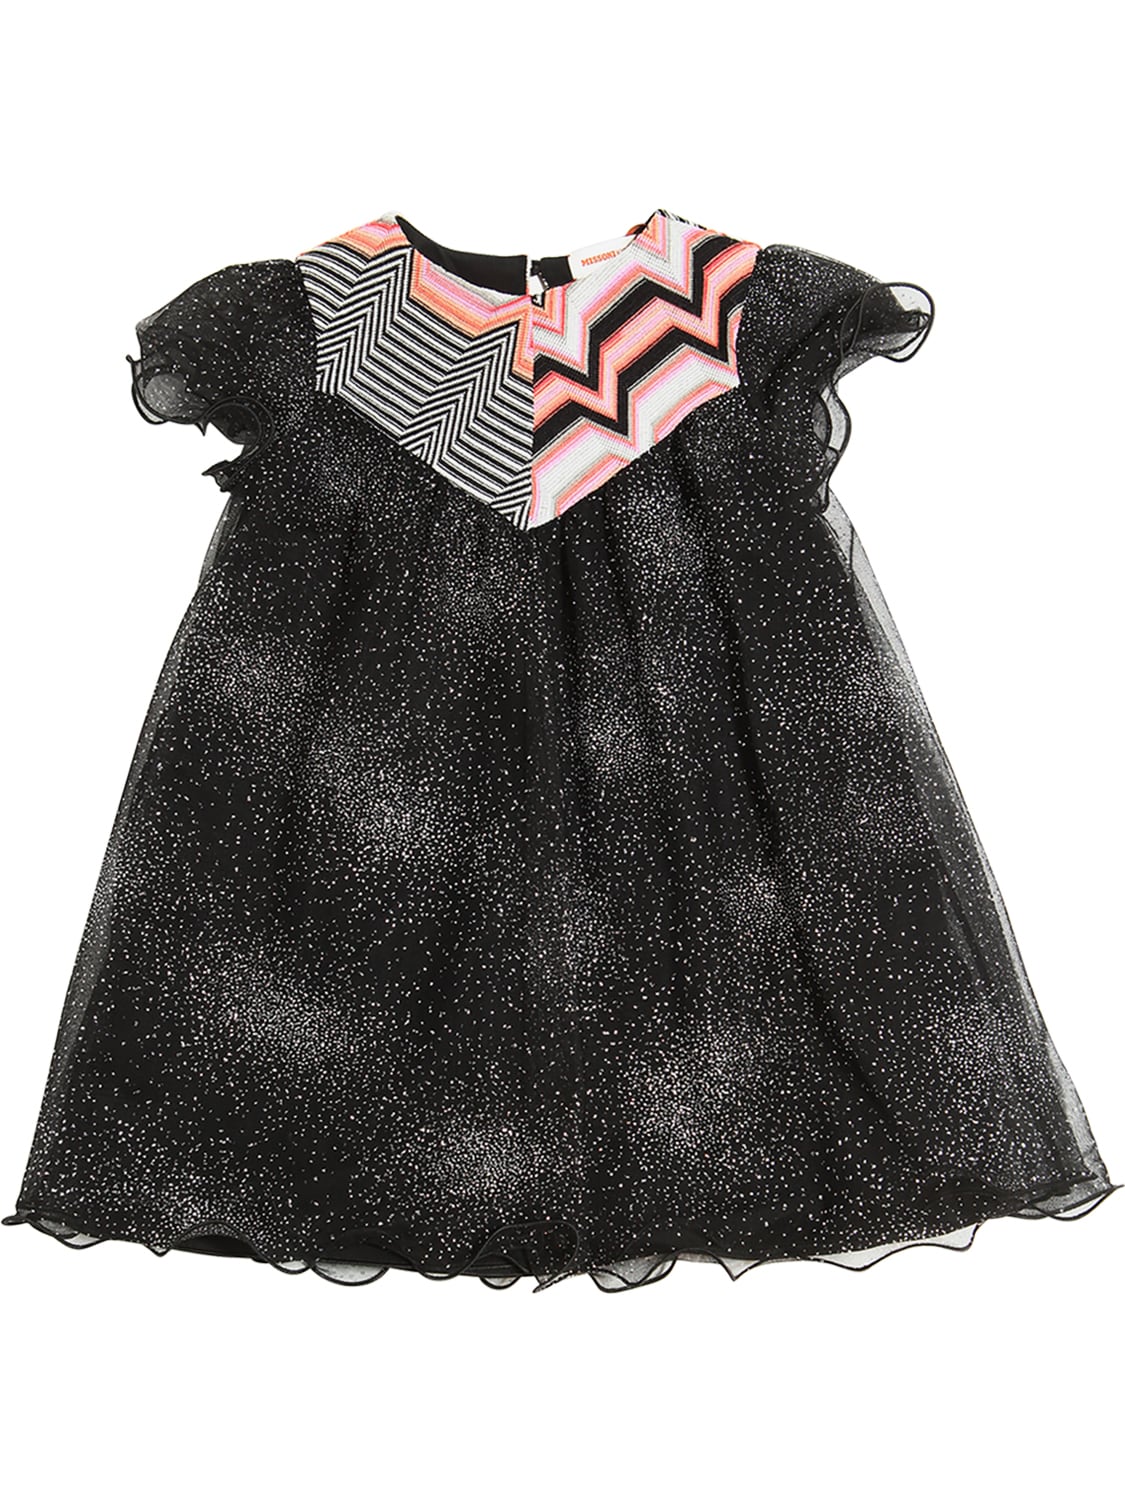 Missoni Kids' Glittered Tulle & Knit Party Dress In Black